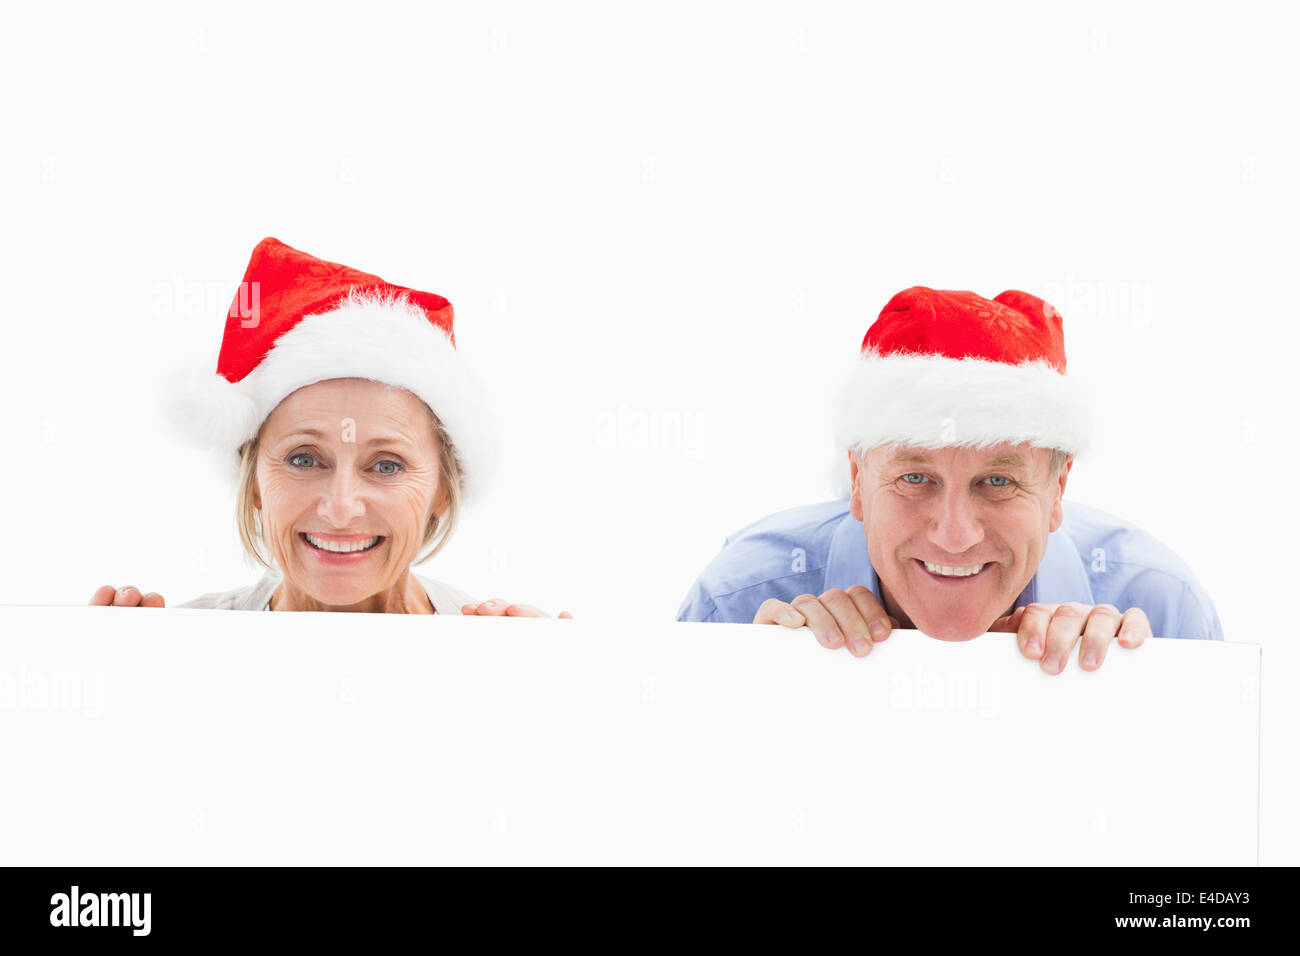 Ambiance festive mature couple smiling at camera Banque D'Images